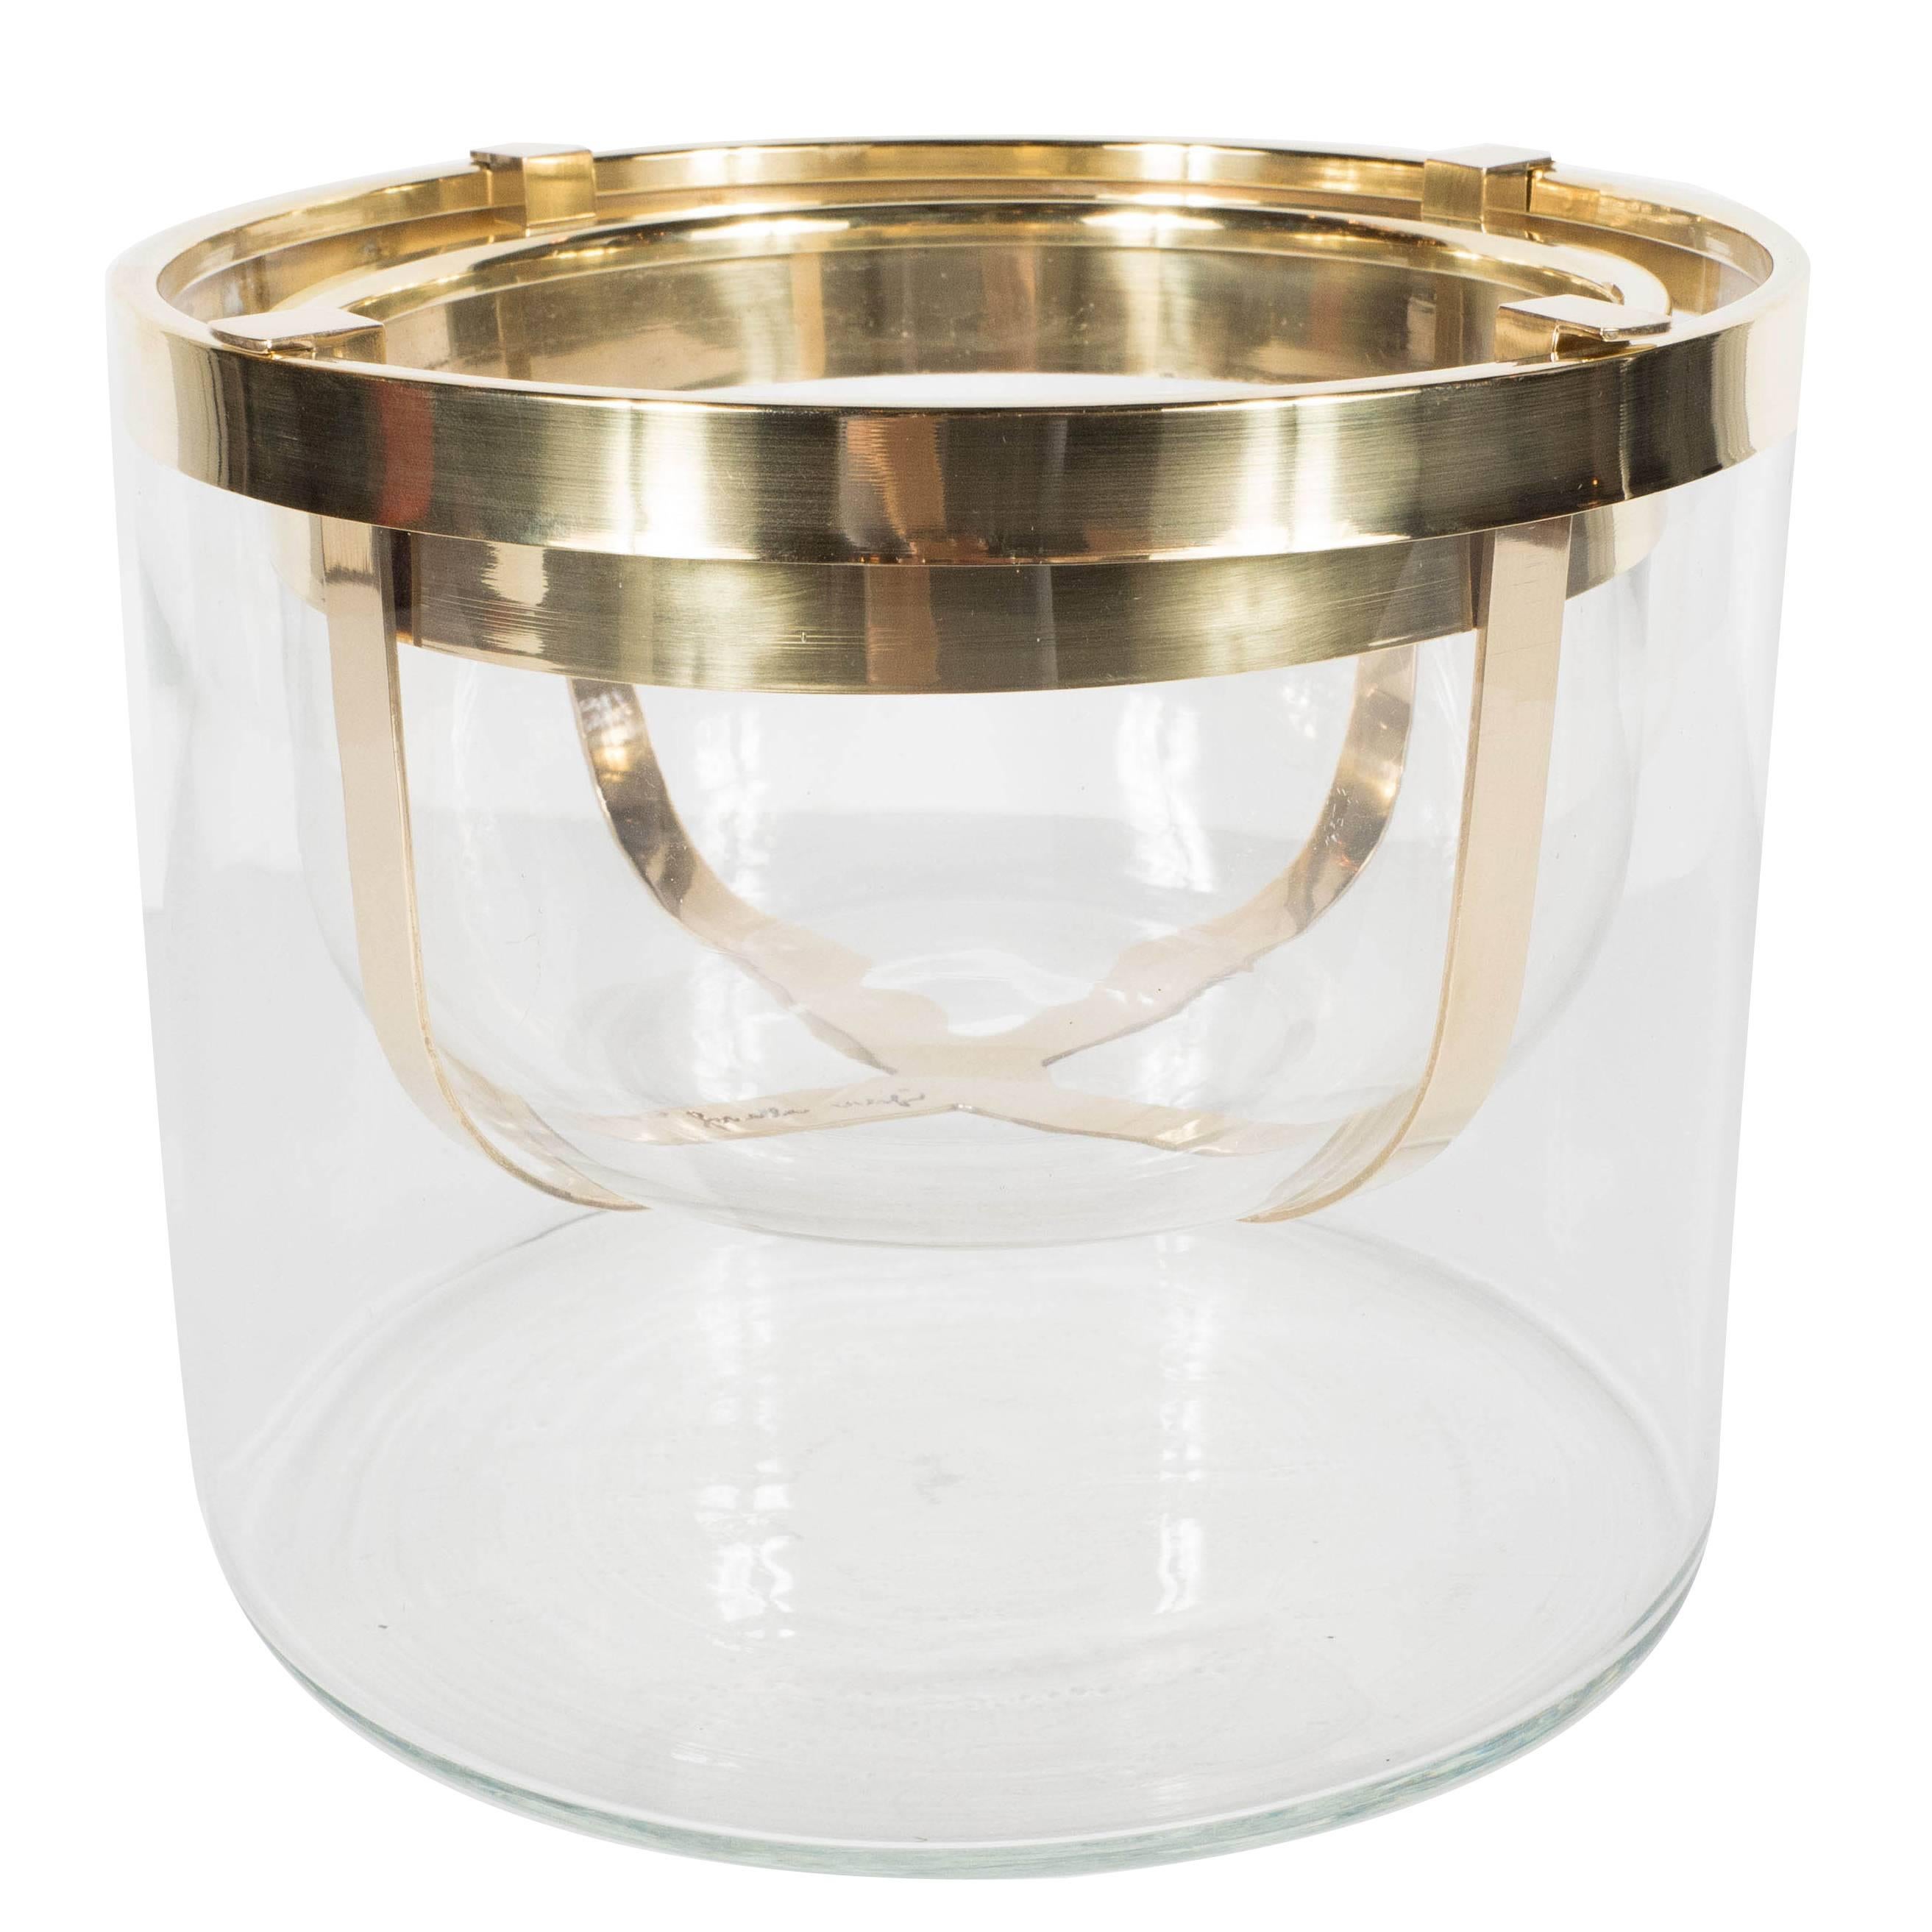 Caviar Server in Clear Glass and Polished Brass, Signed Gabriella Crespi